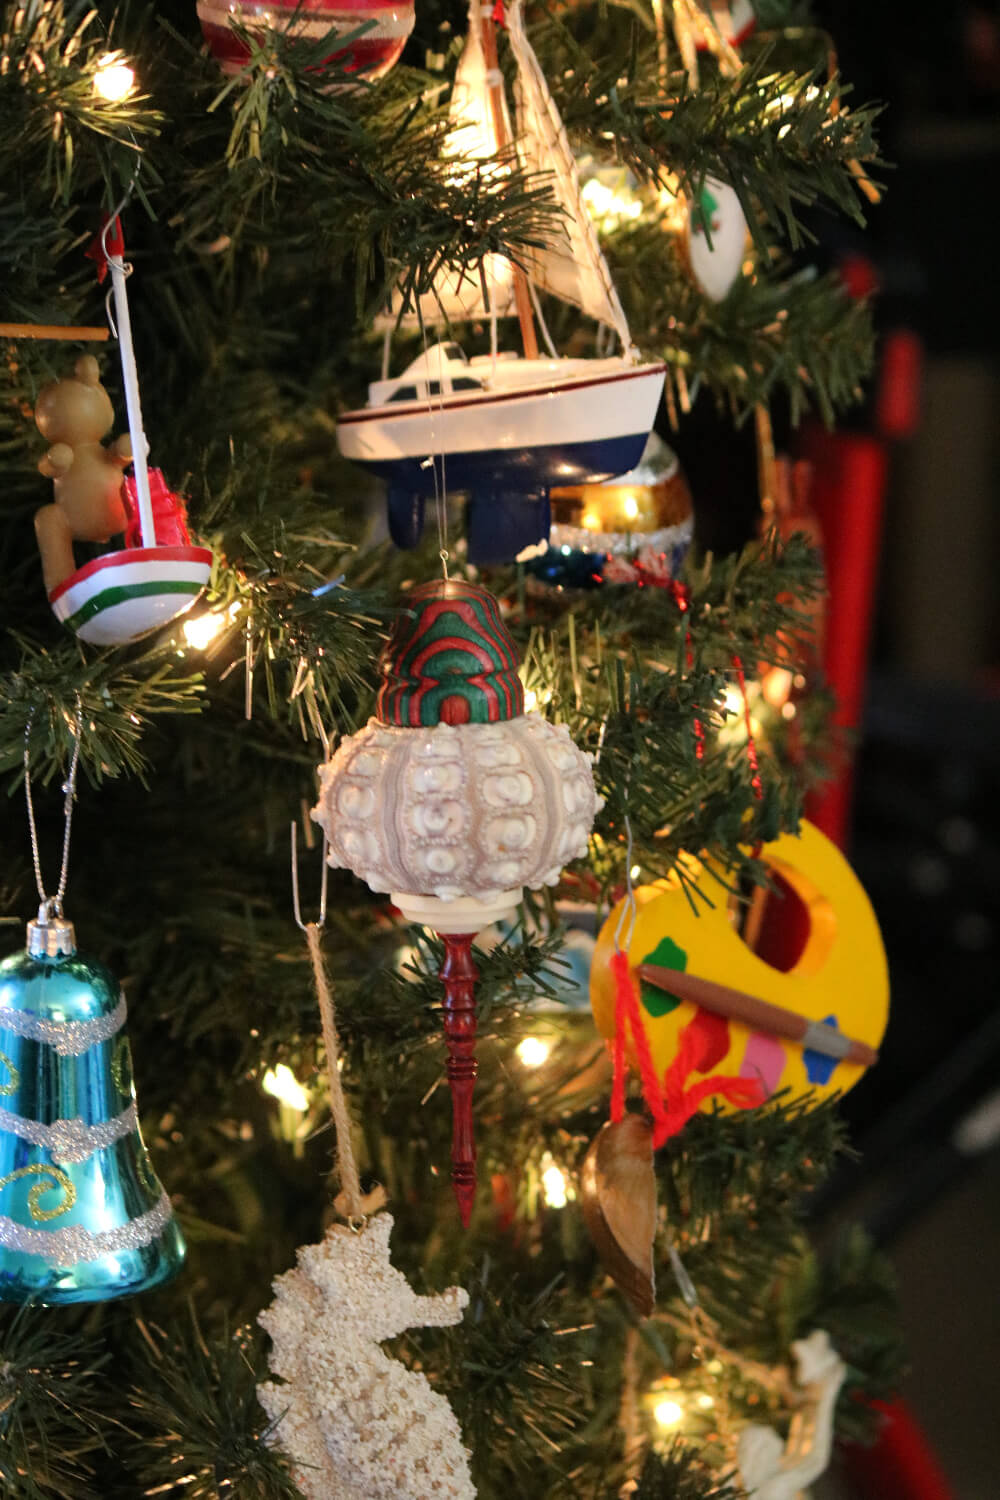 In The Neighbors' Christmas Trees, these are the ornaments on Ron & Pat's tree